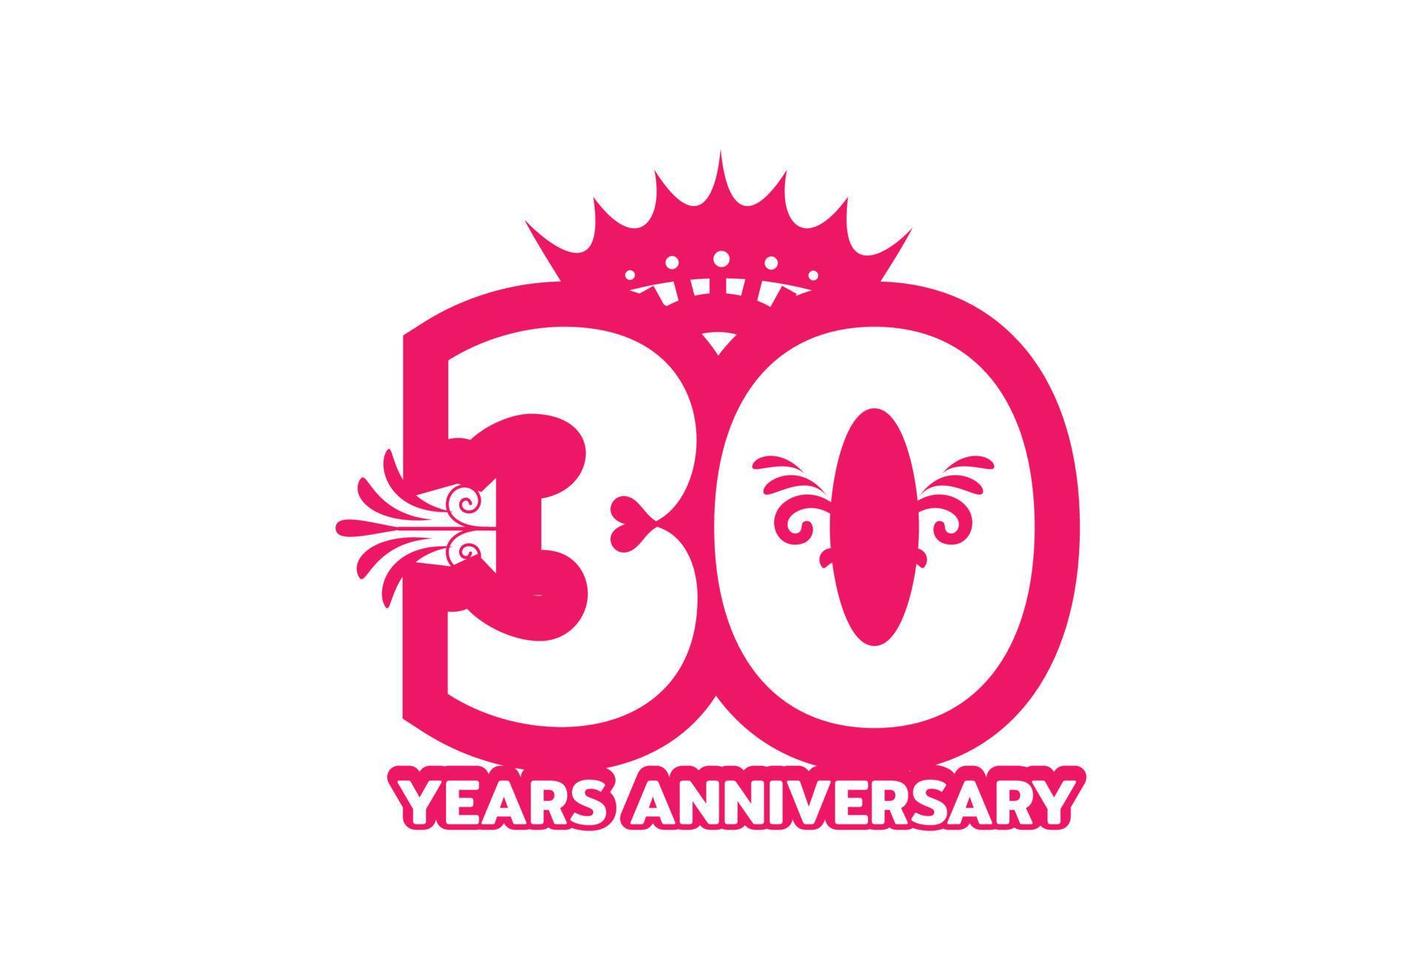 30 years anniversary logo and sticker design template vector